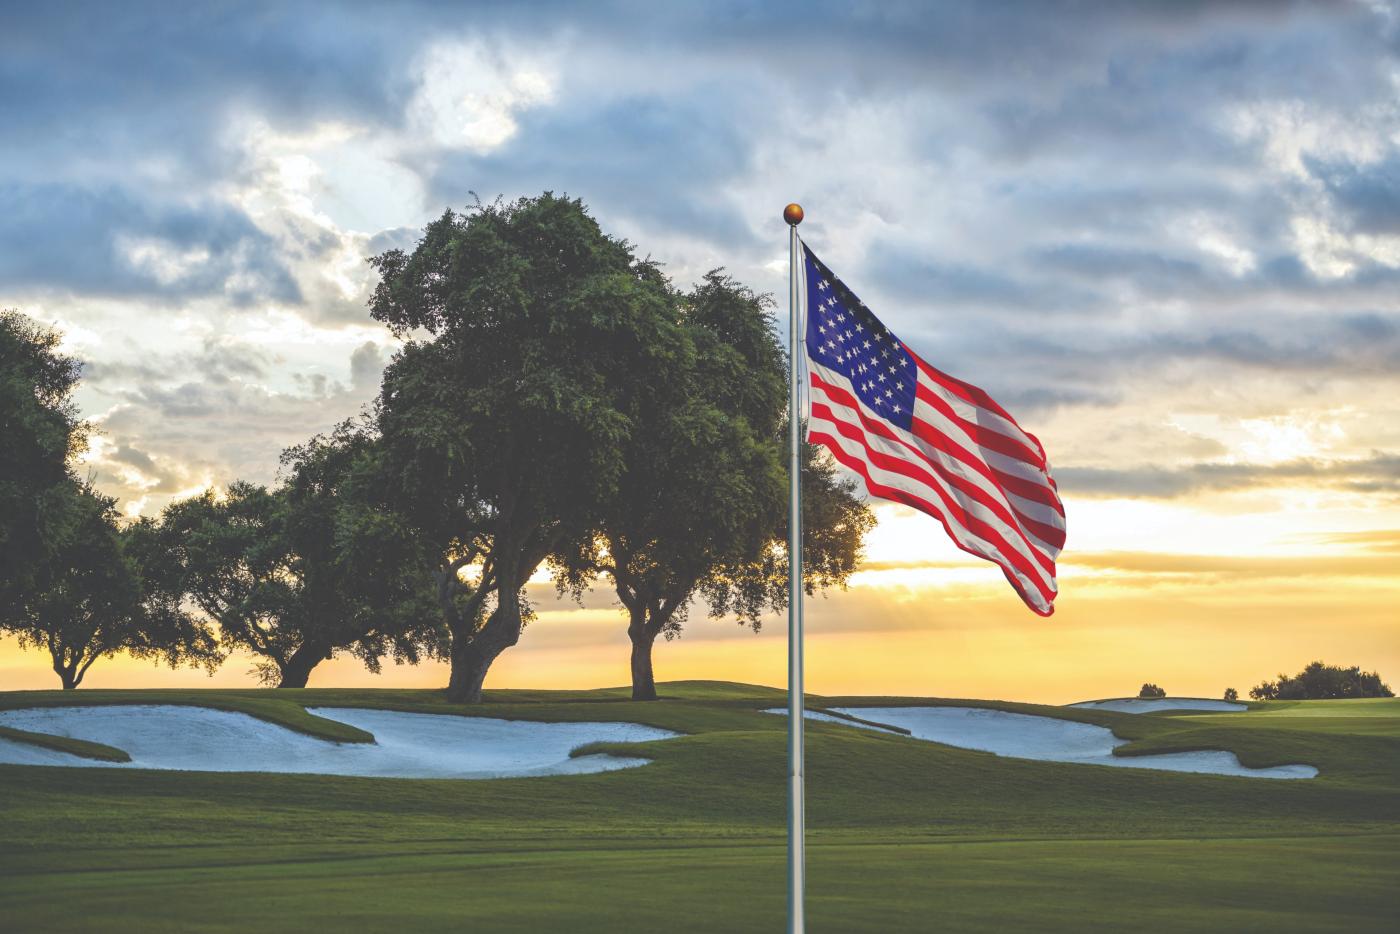 golf course with the American flag in the foreground